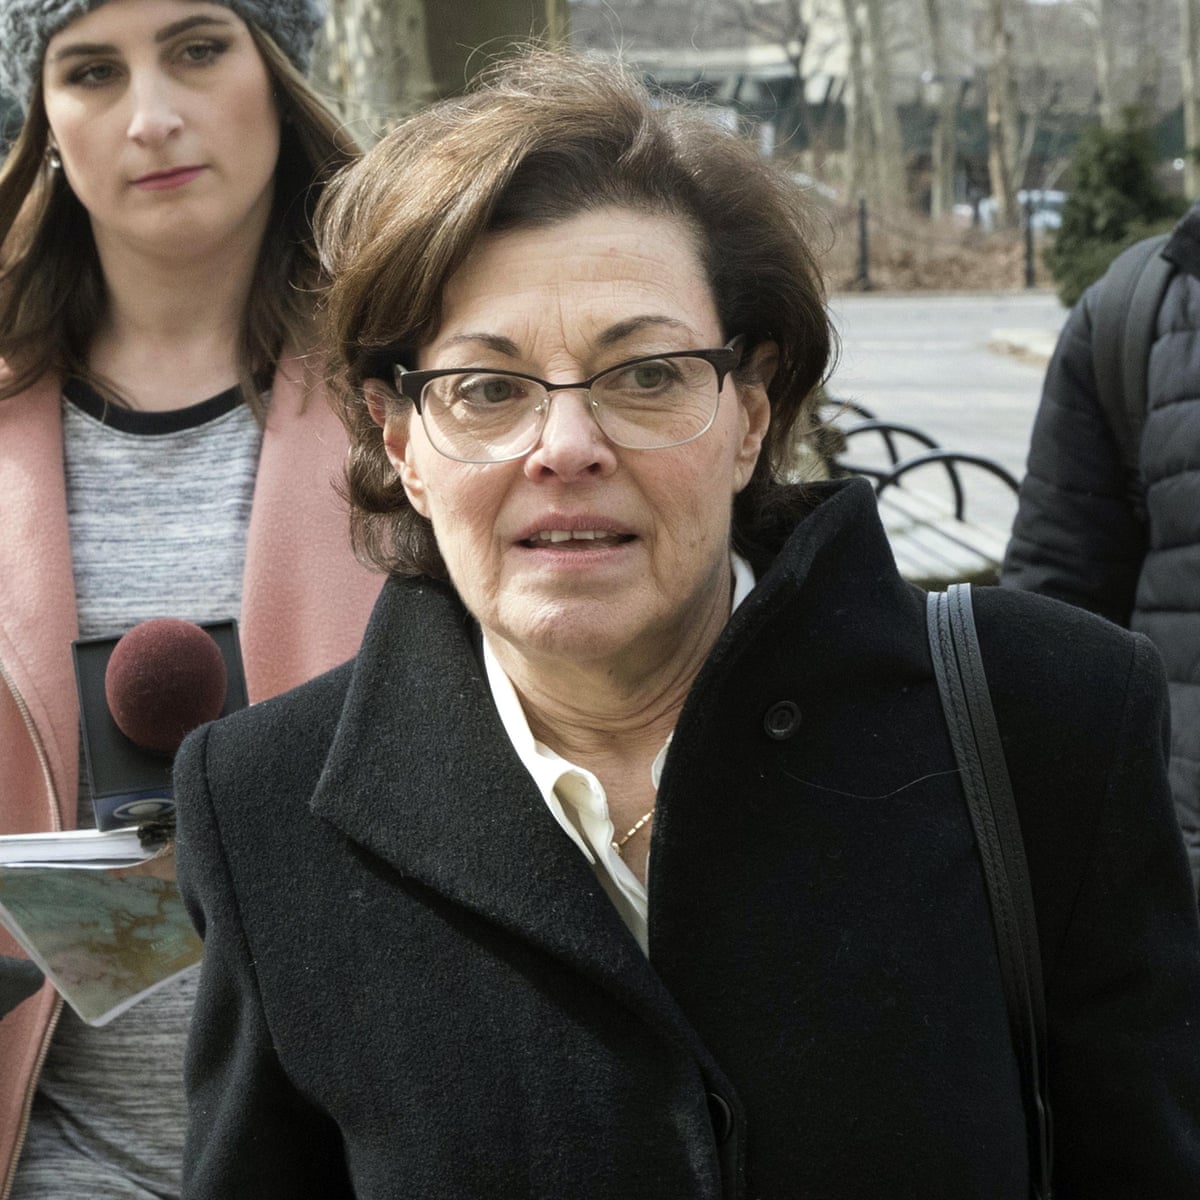 Nxivm co-founder Nancy Salzman jailed for more than 3 years in sex ...